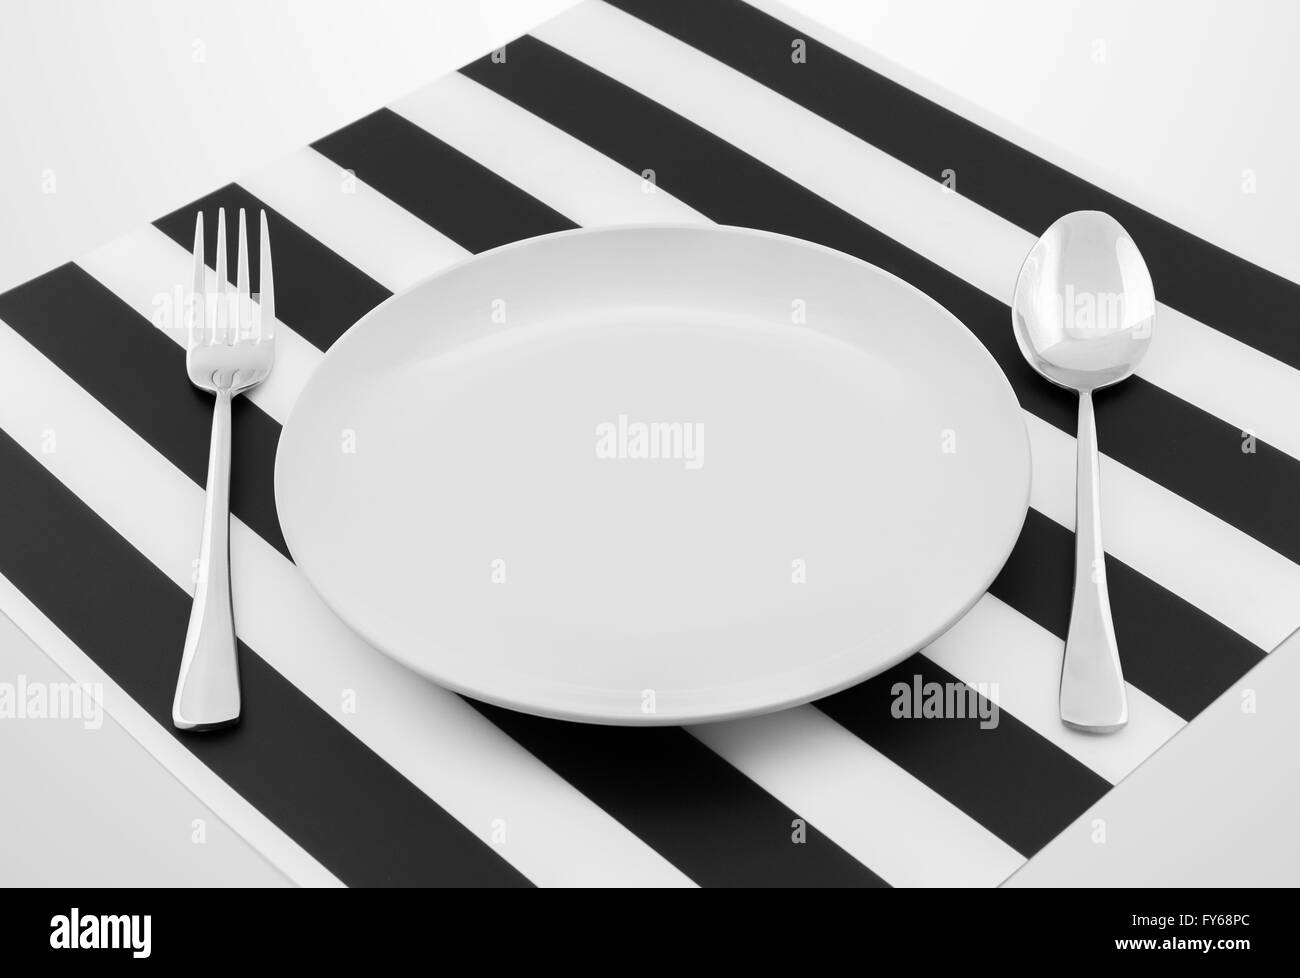 Plate with spoon and fork on a table Stock Photo